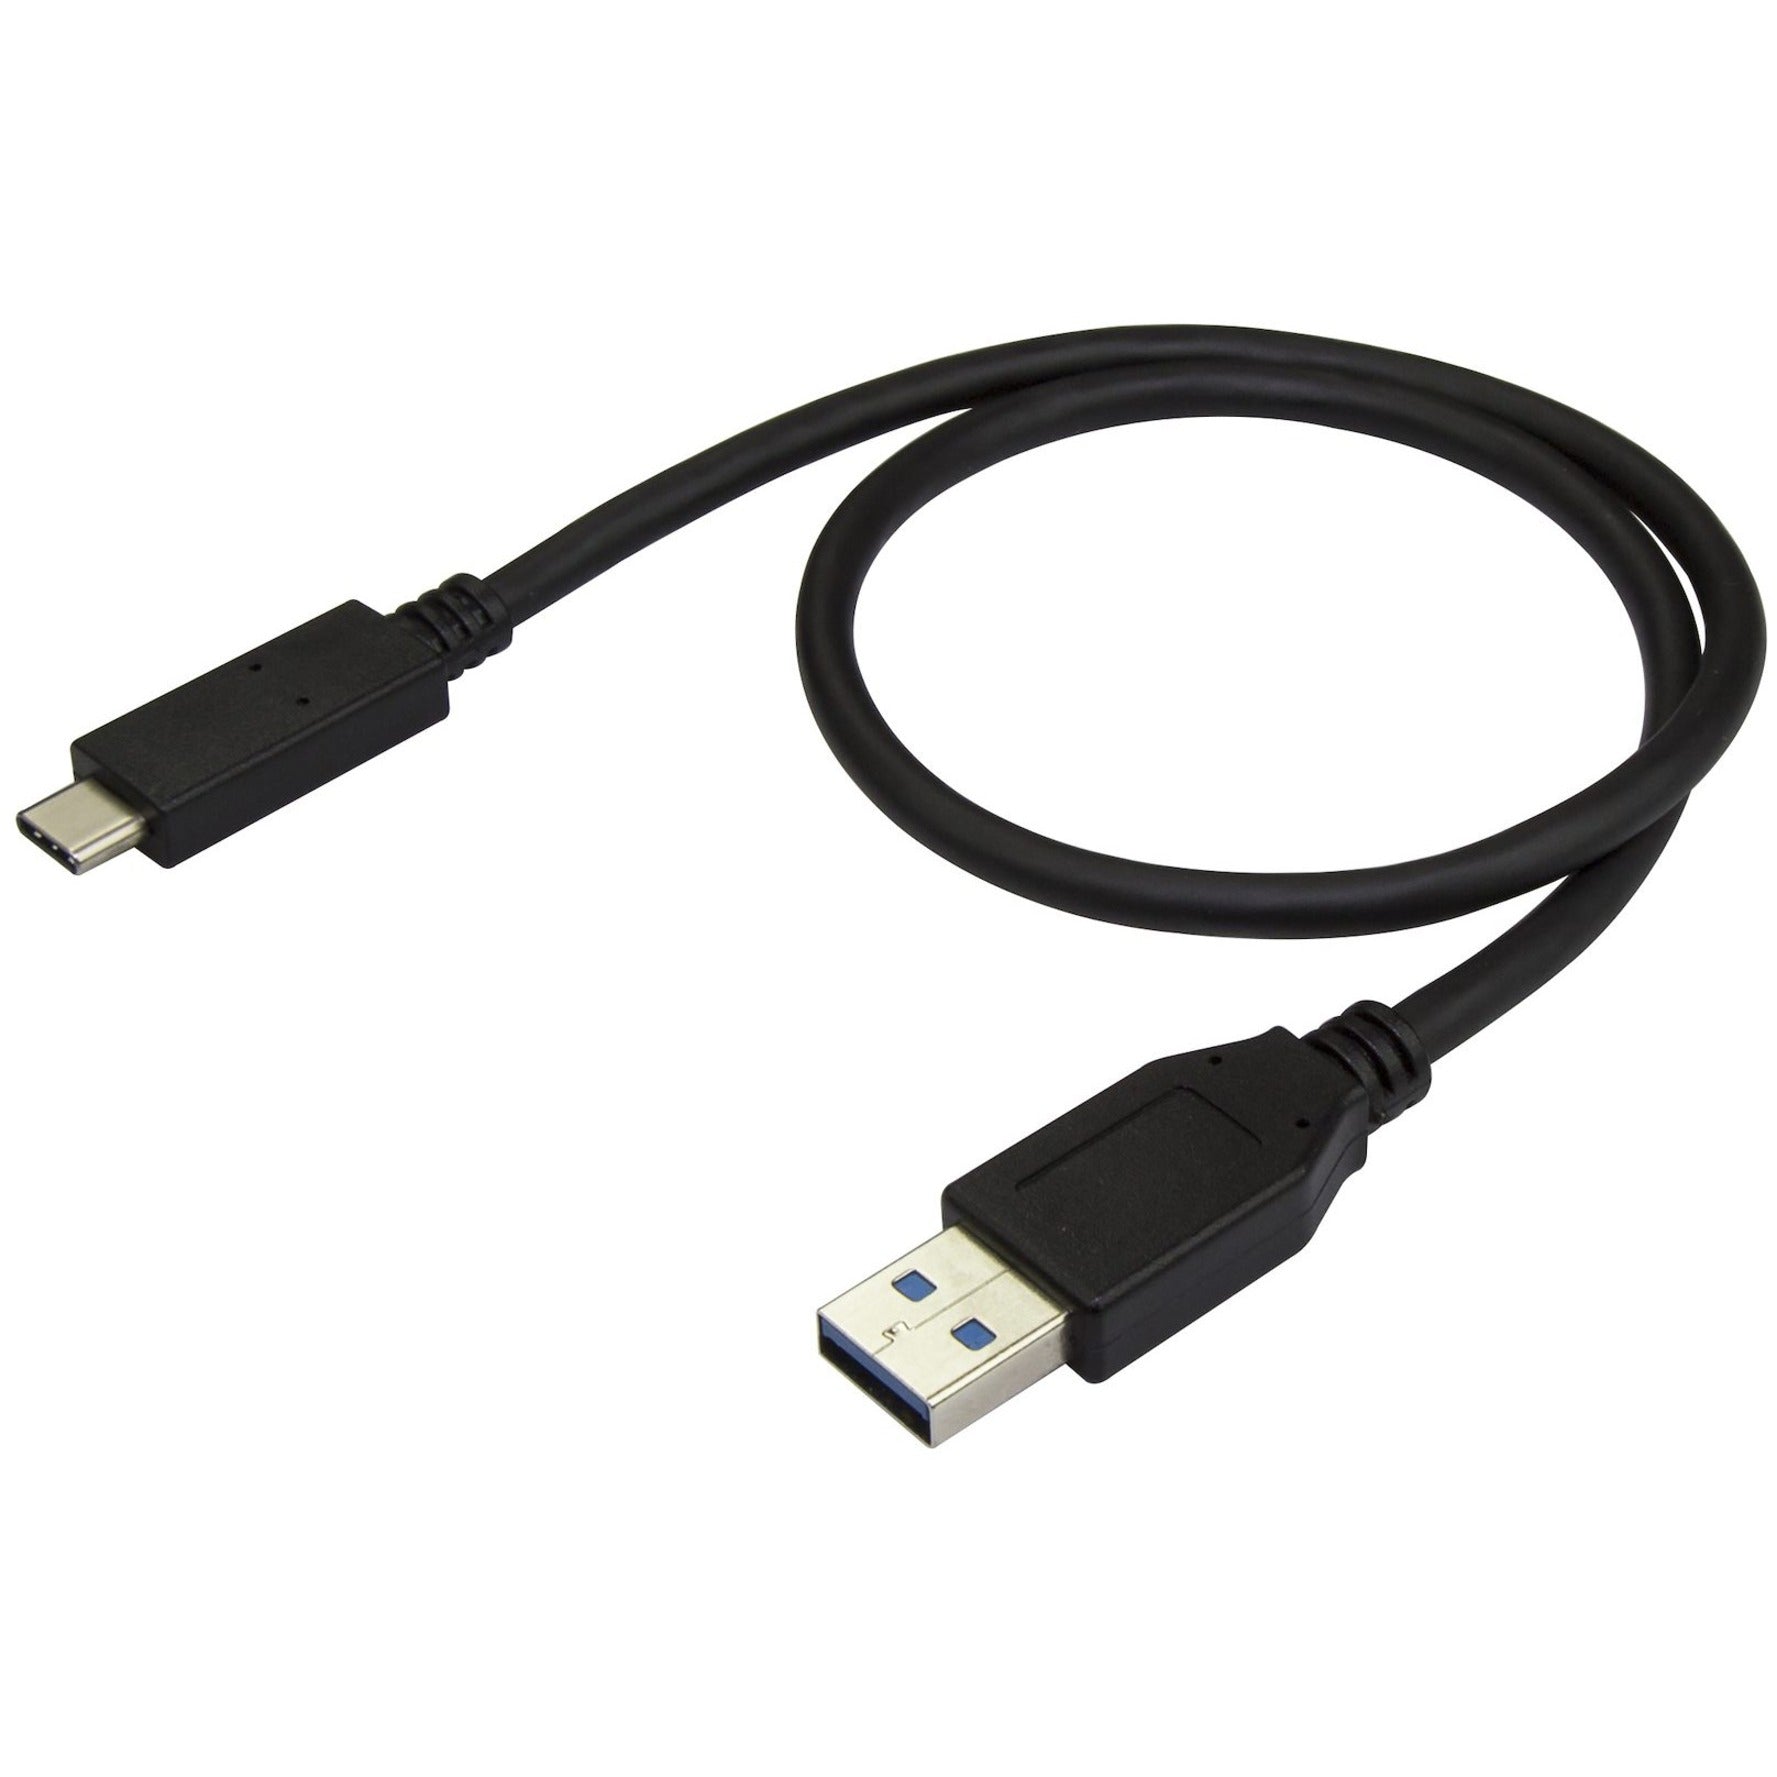 StarTech.com USB31AC50CM Sync/Charge USB Data Transfer Cable, 0.5m USB to USB C Cable - USB 3.1 (10Gbps)